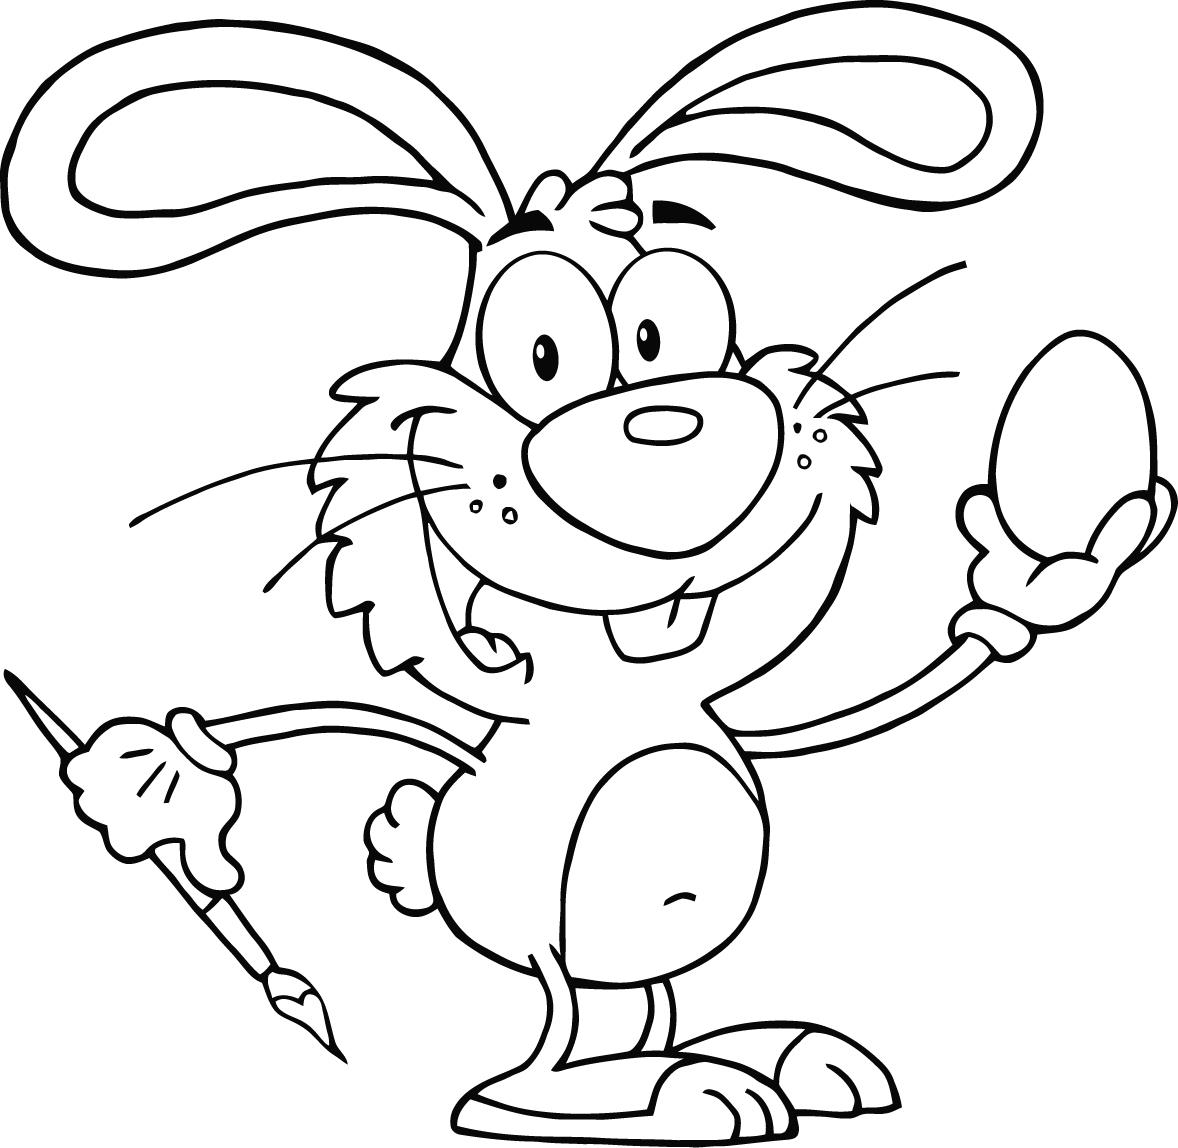 rabbit picture for colouring free printable rabbit coloring pages for kids rabbit picture for colouring 